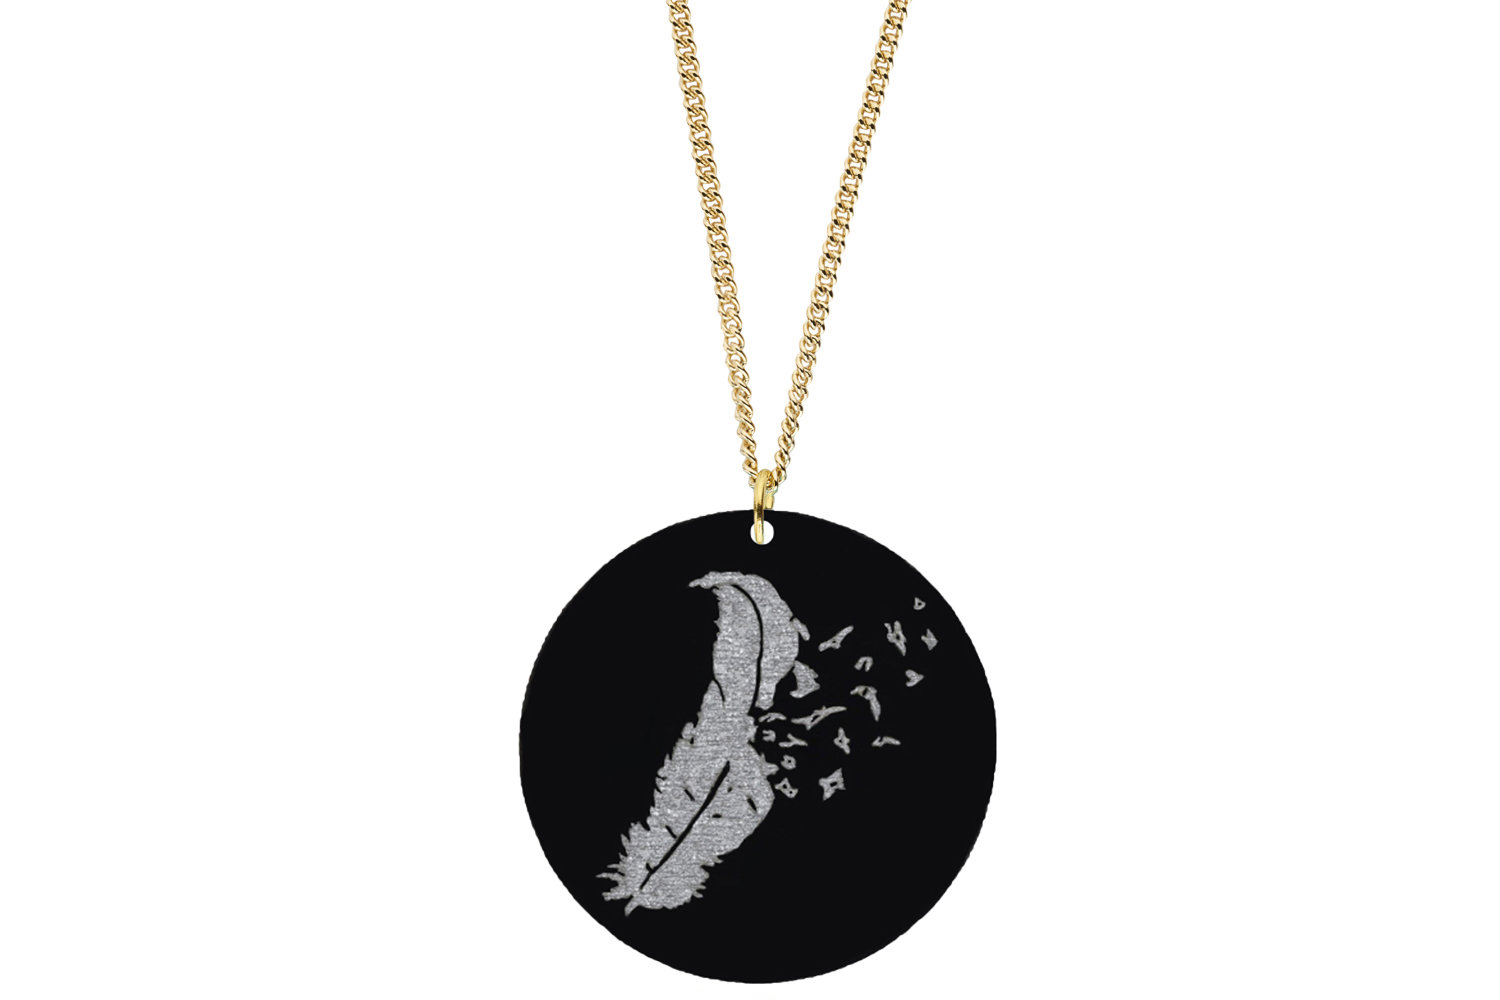 Feather Bird Pendant Subtle Style Refined with Paint on Chain Necklace